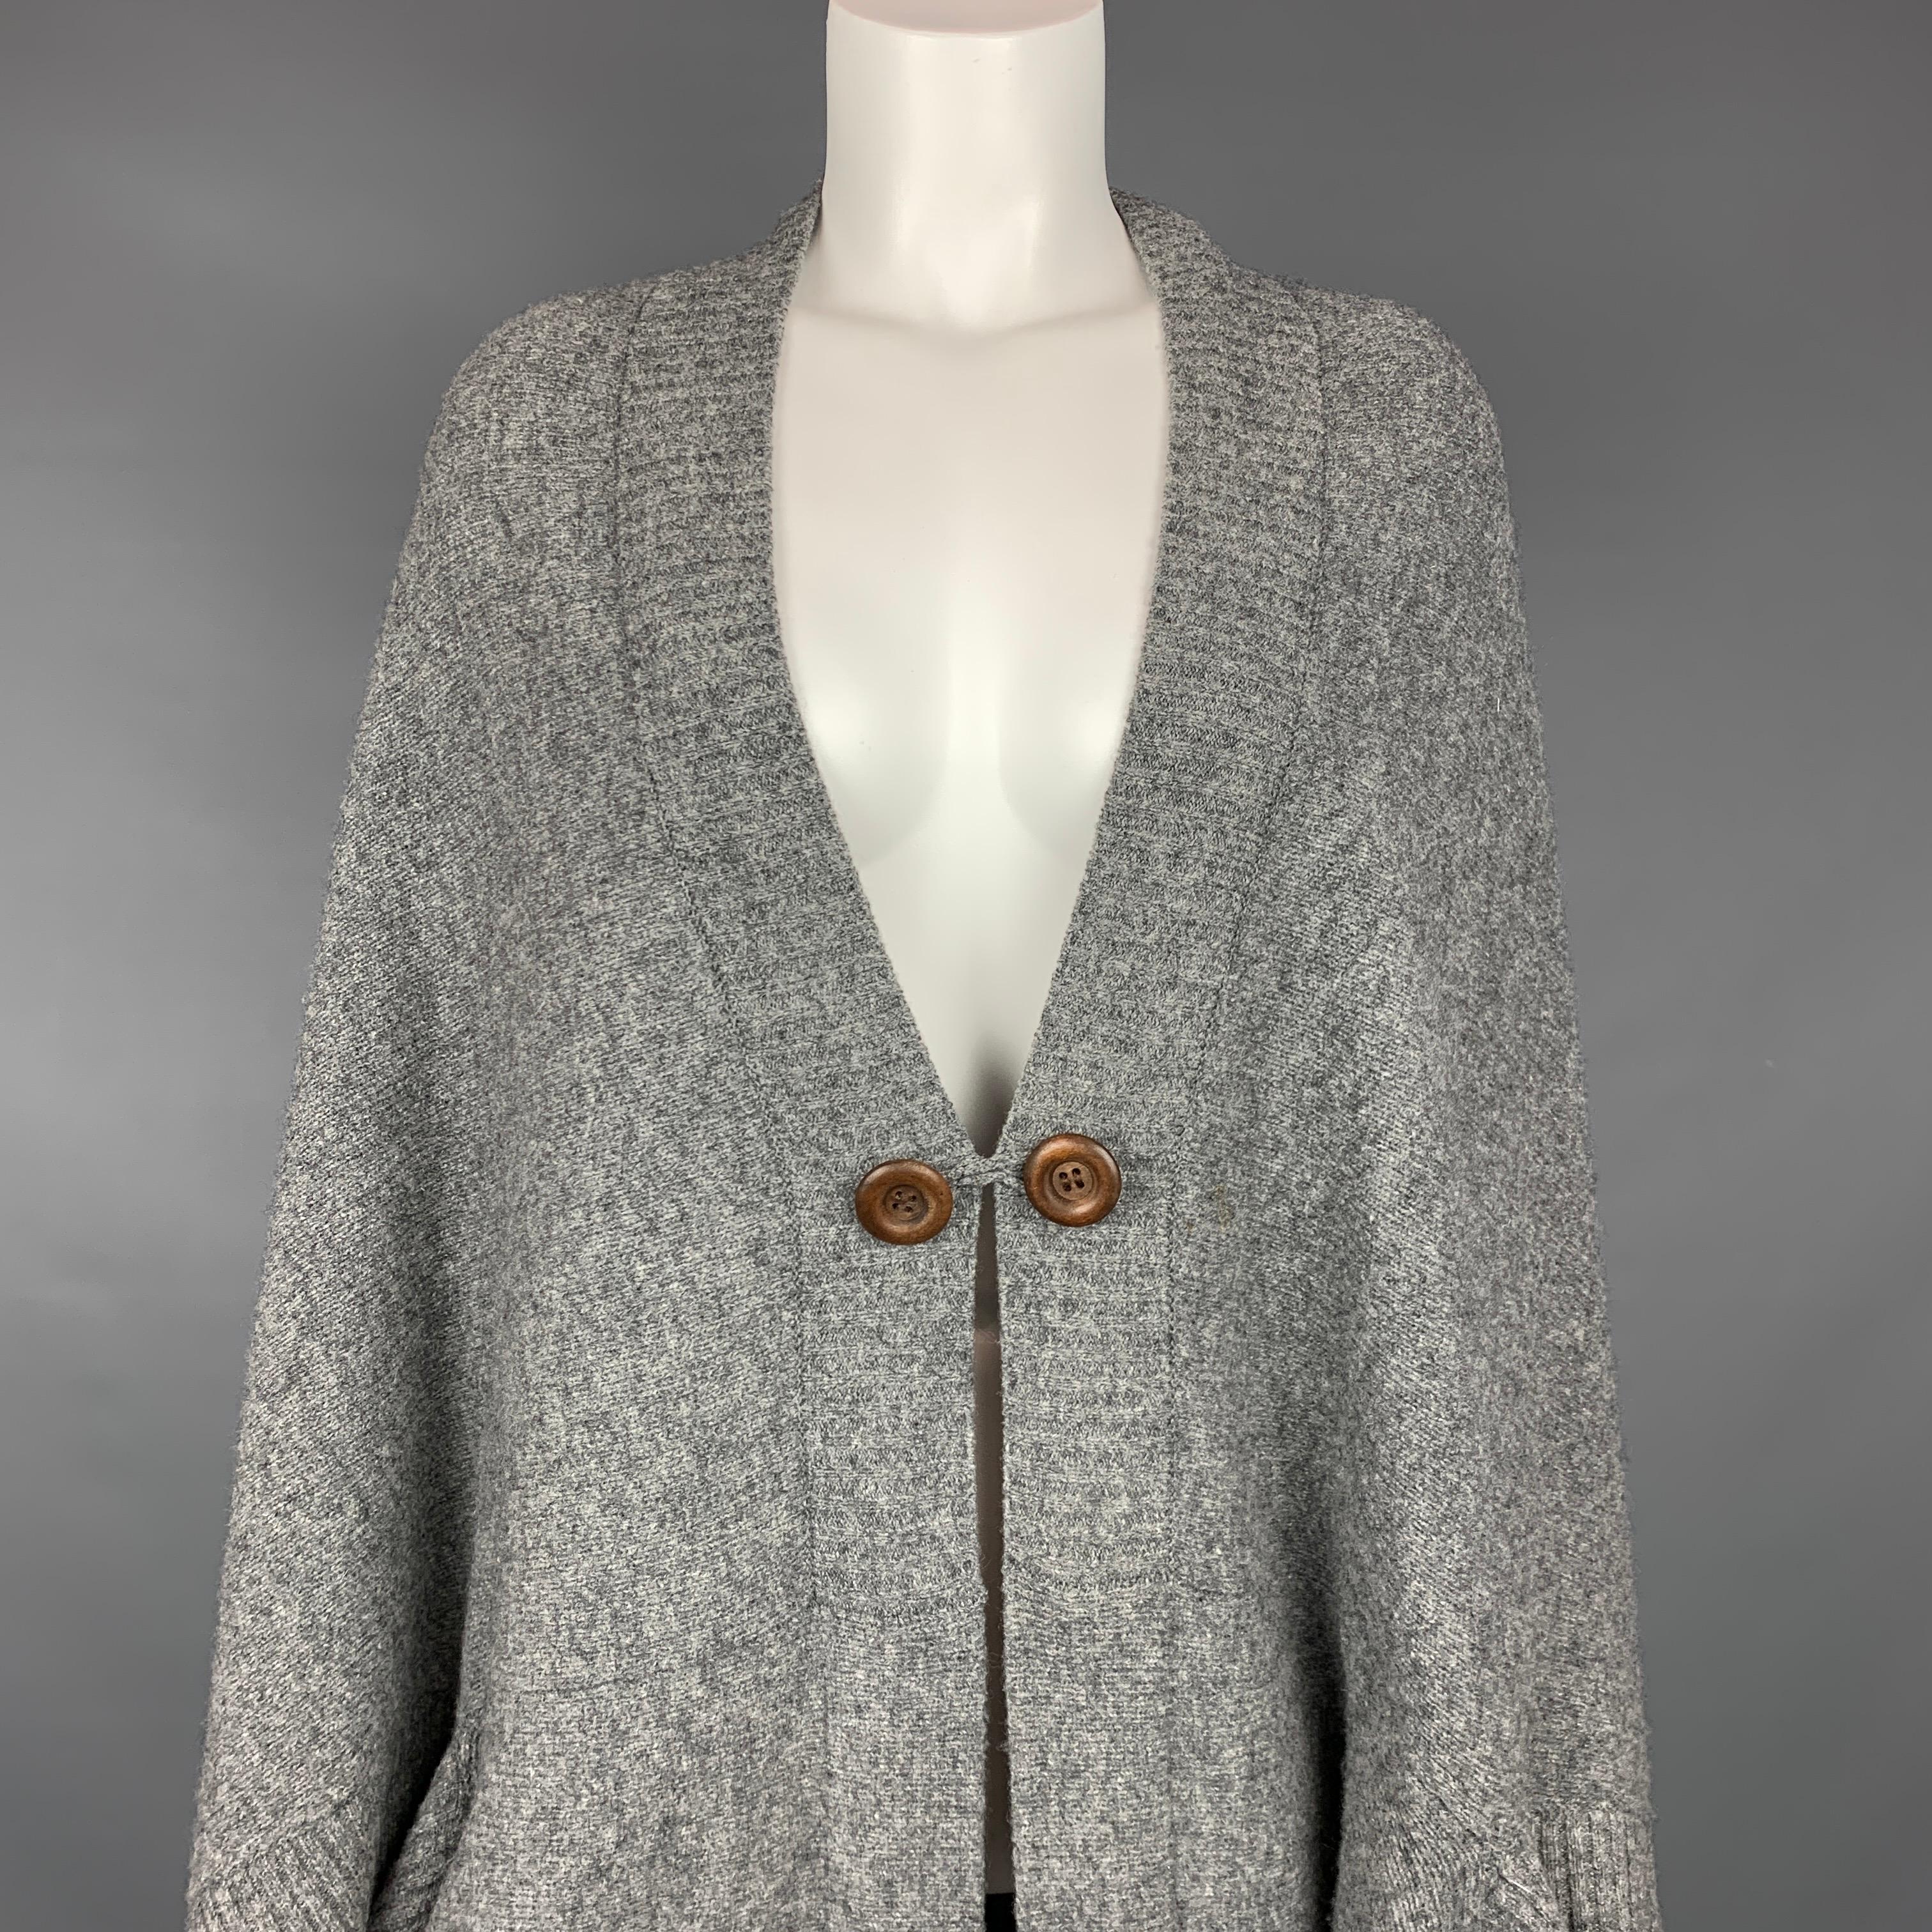 SEE by CHLOE cardigan comes in a grey knitted material featuring a circle style, 3/4 sleeves, slit pockets, and a single button closure.

Very Good Pre-Owned Condition.
Marked: No size marked

Measurements:

Bust: 42 in.
Sleeve: 3 in.
Length: 36 in. 